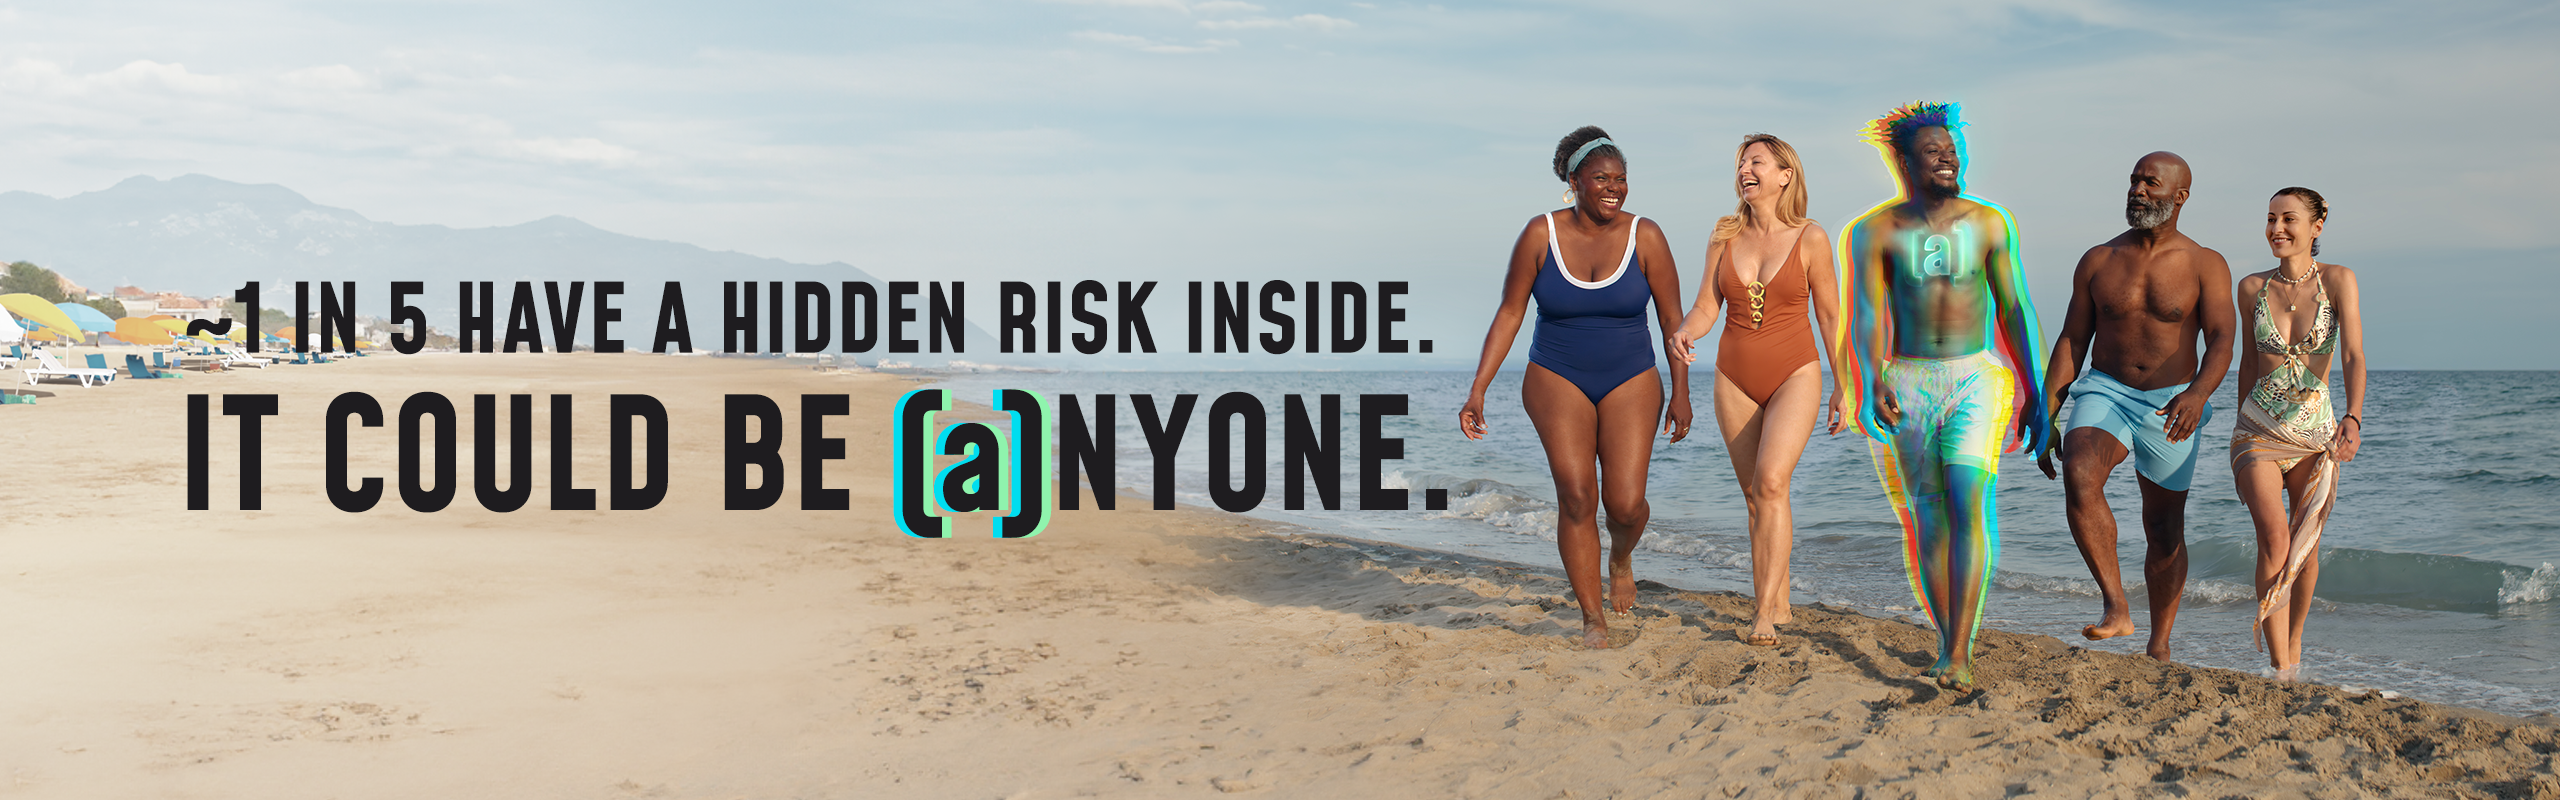 1 in 5 have a hidden risk inside.